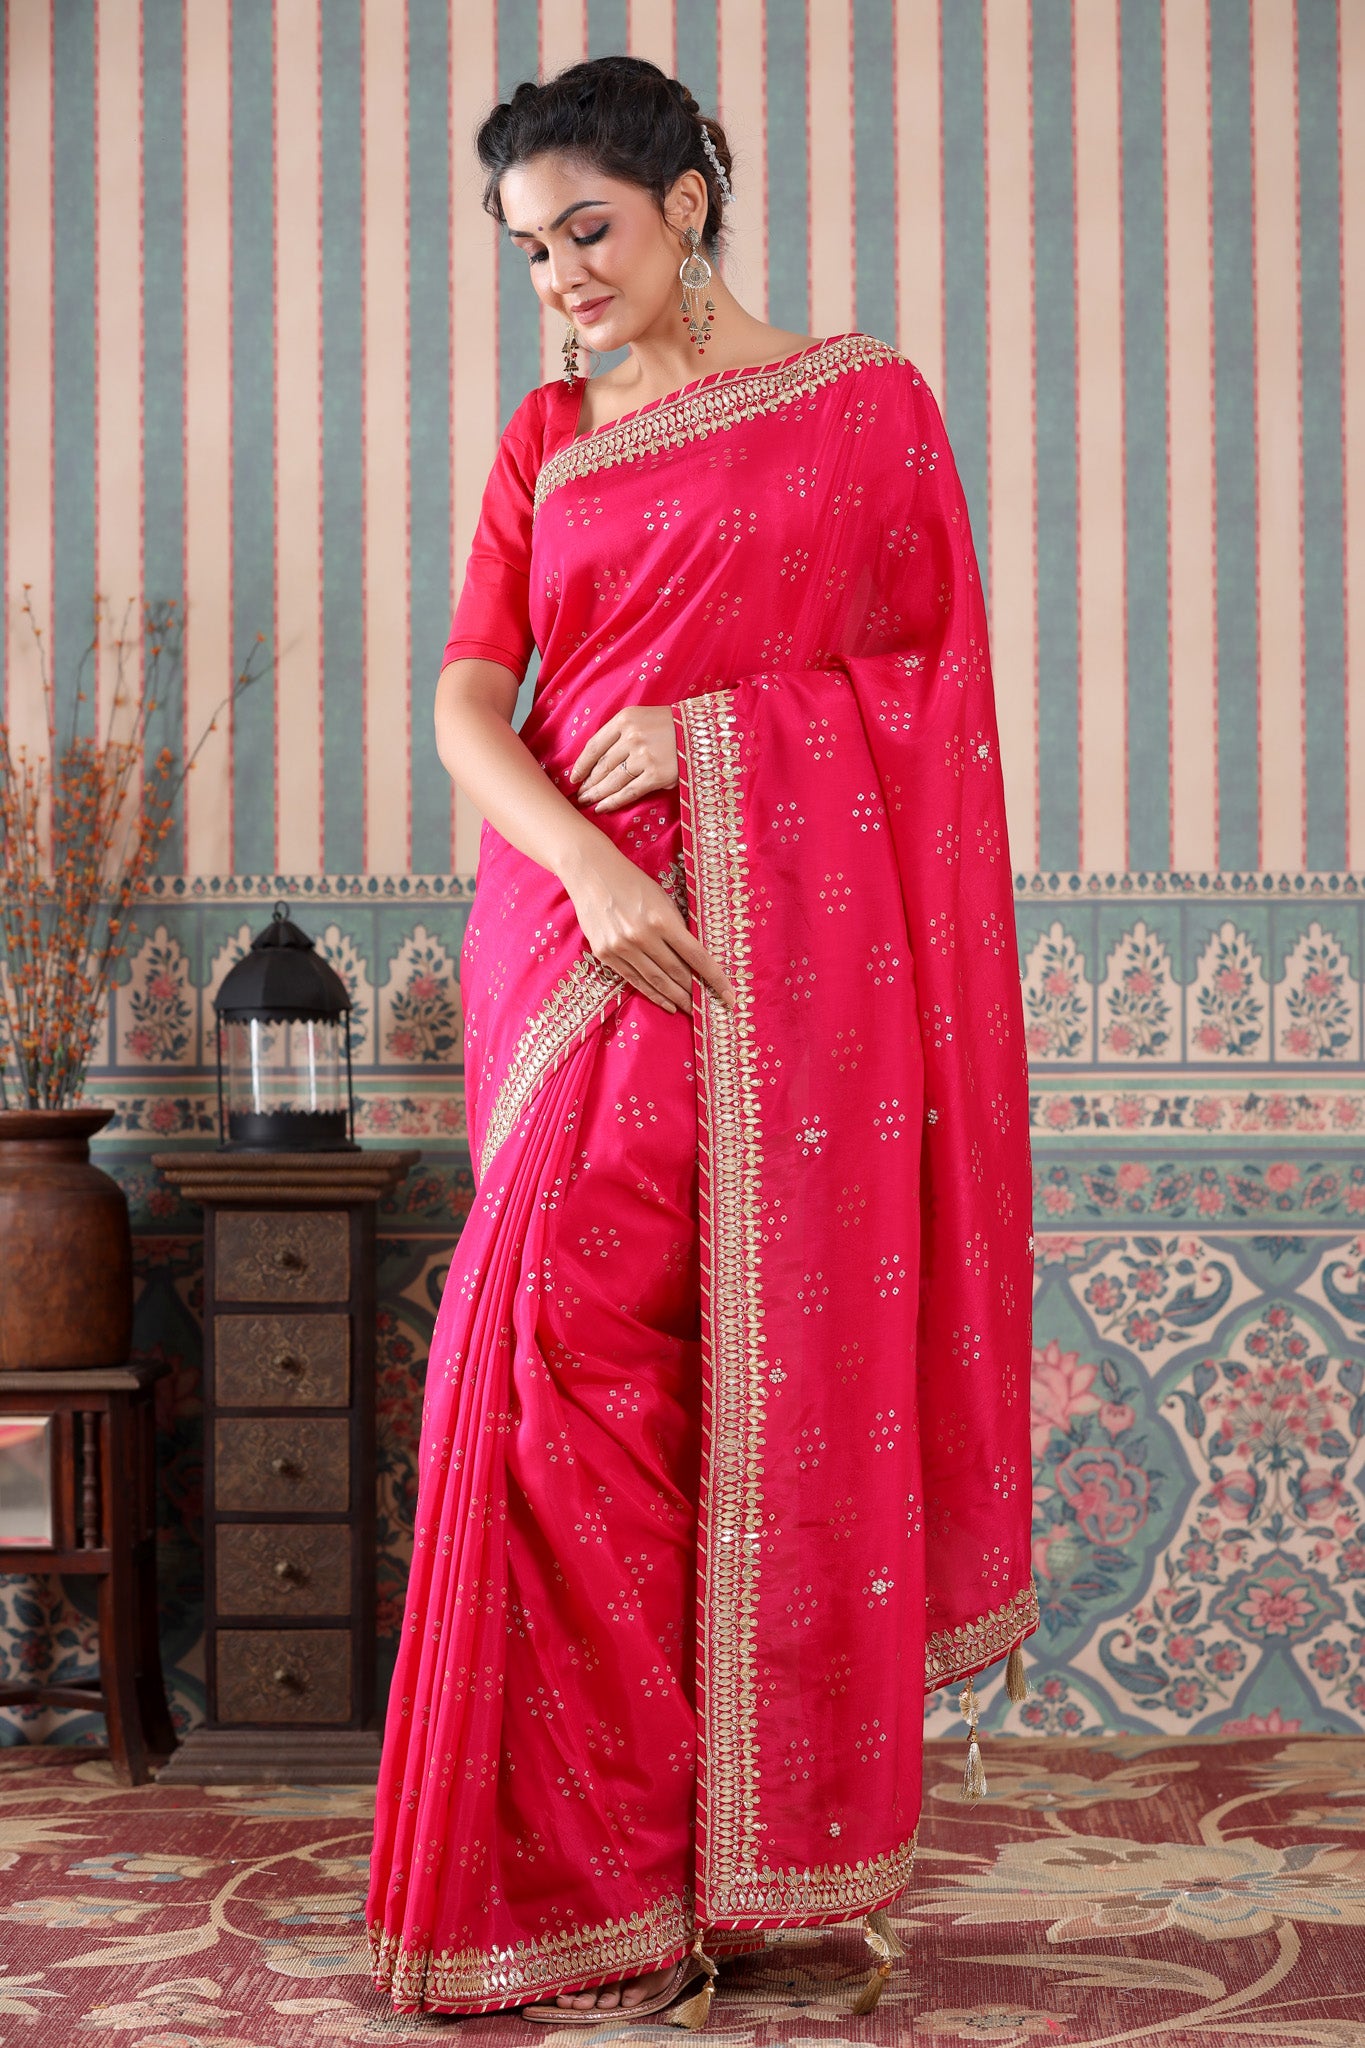 Shop beautiful pink embroidered georgette saree online in USA. Make a fashion statement at weddings with stunning designer sarees, embroidered sarees with blouse, wedding sarees, handloom sarees from Pure Elegance Indian fashion store in USA.-saree